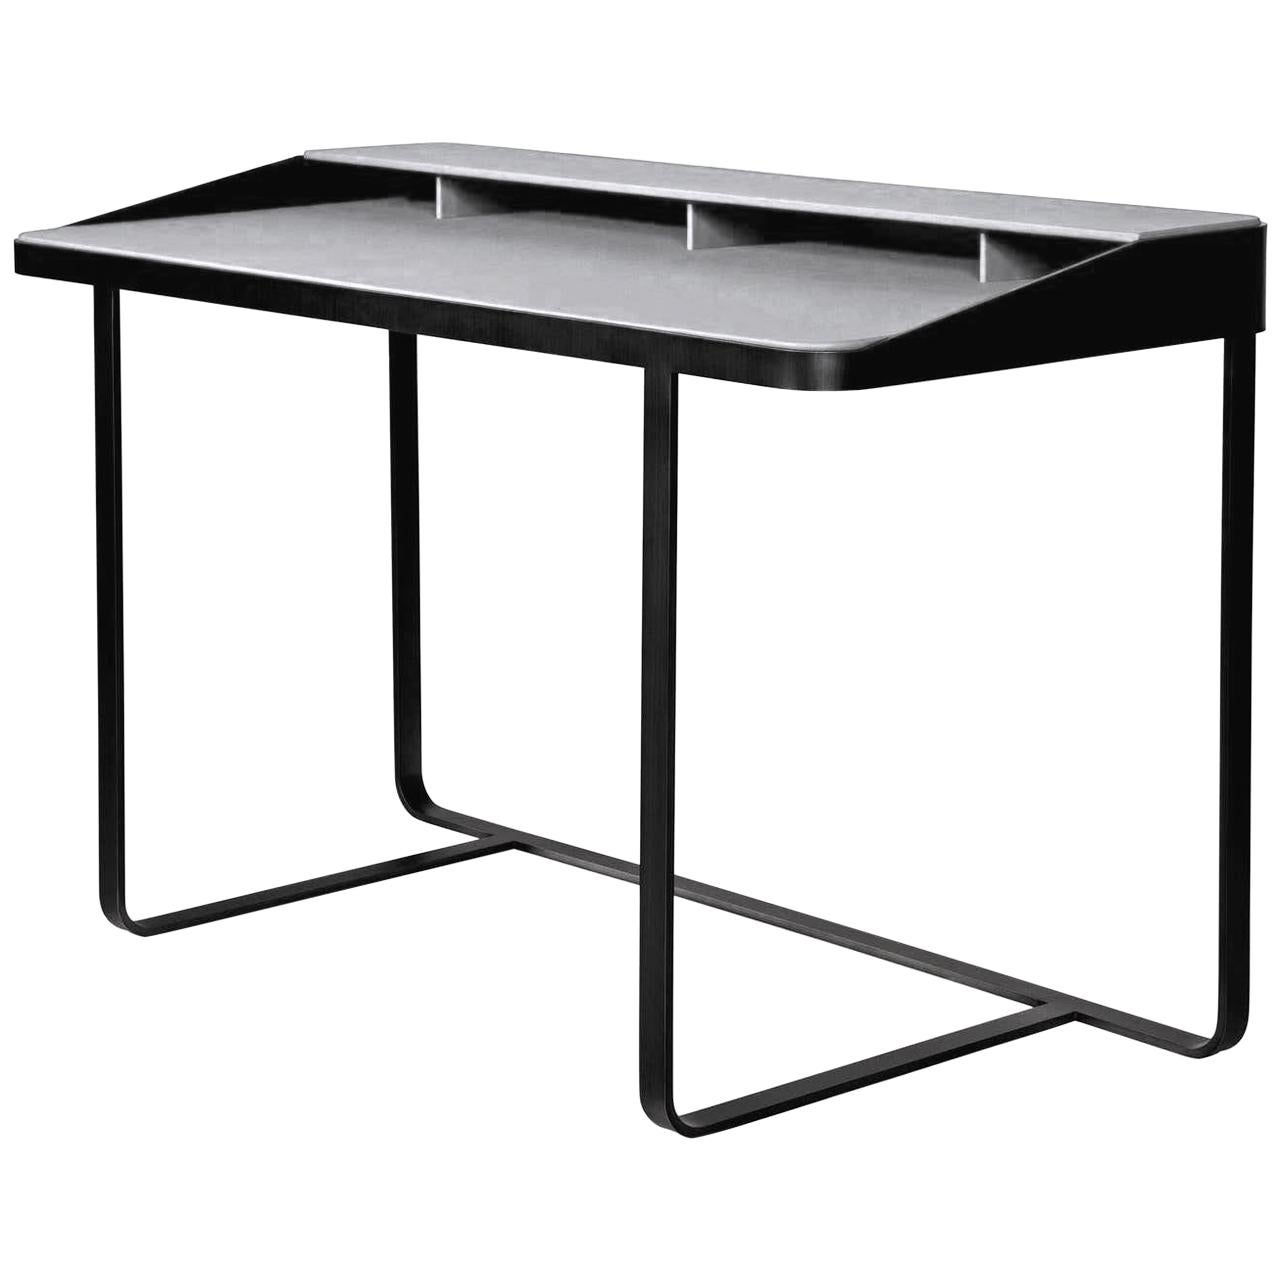 Twain, Grey Leather Desk, Designed by Gordon Guillaumier, Made in Italy For Sale